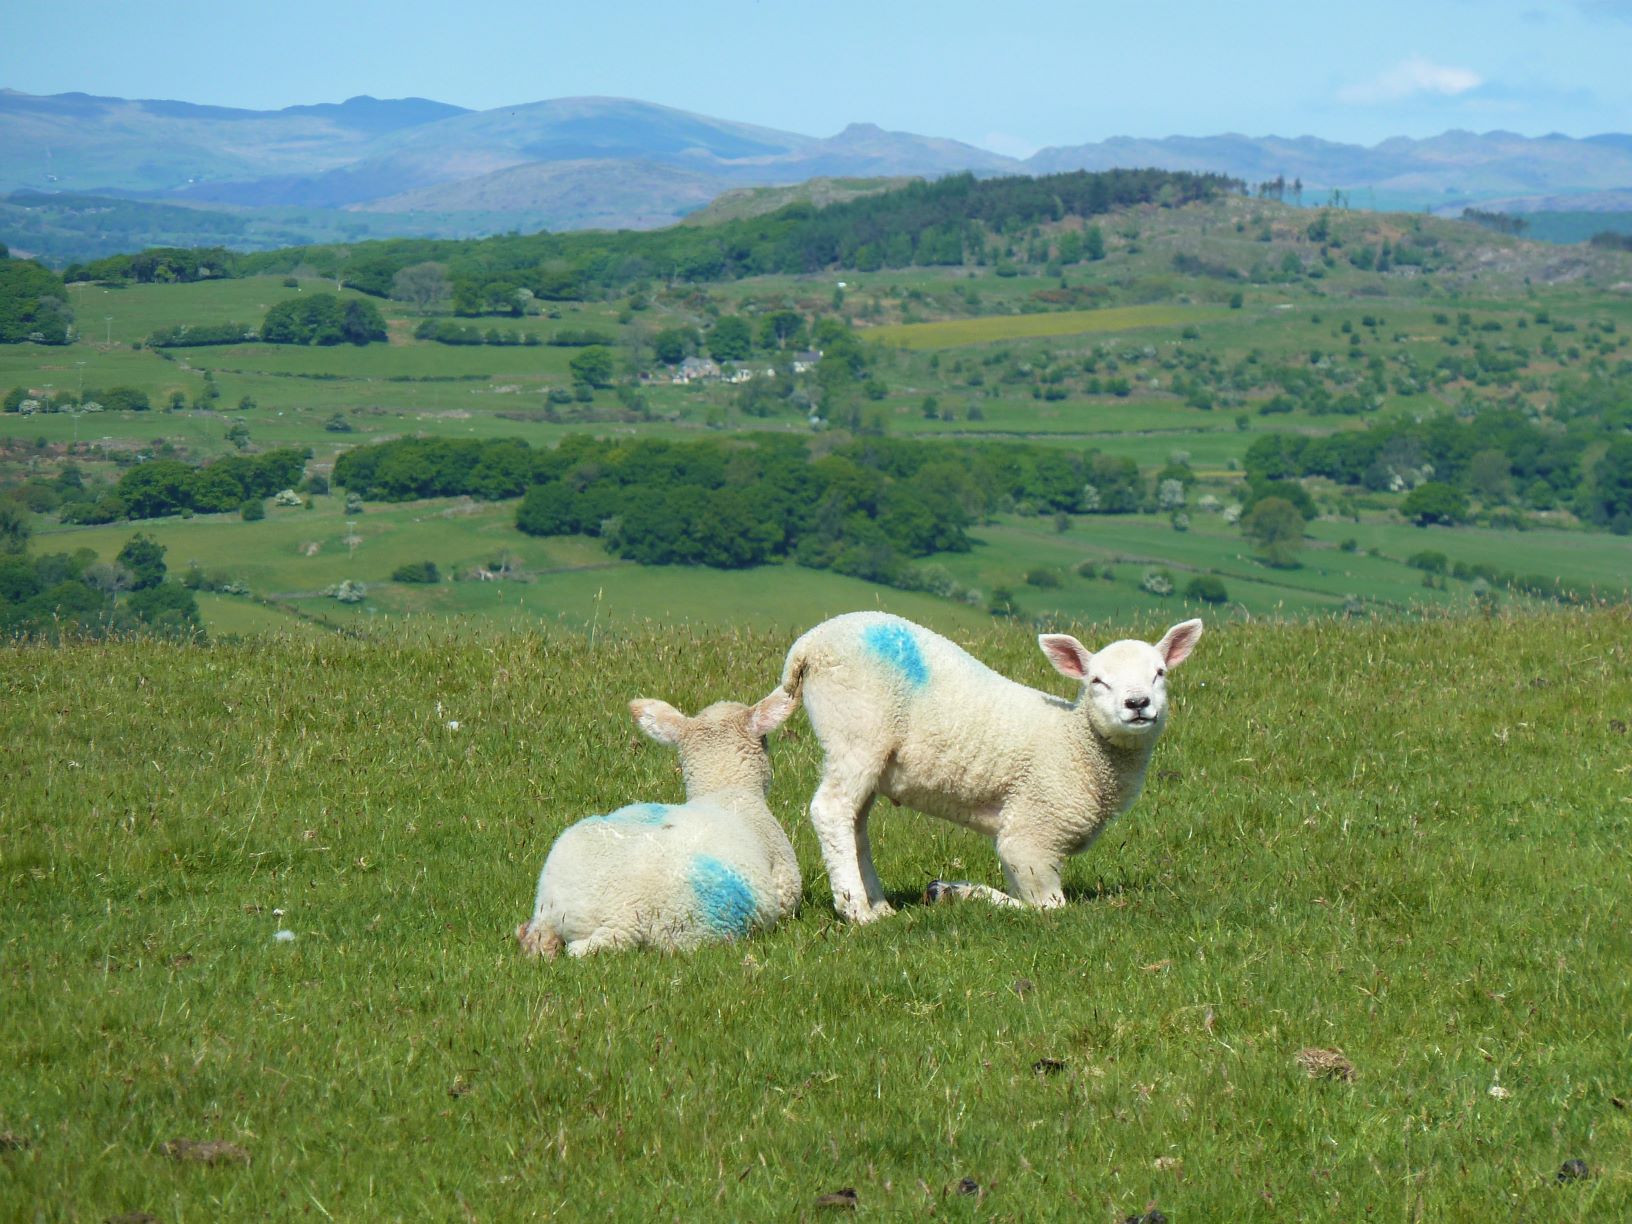 Lambs in the Cartmel Valley